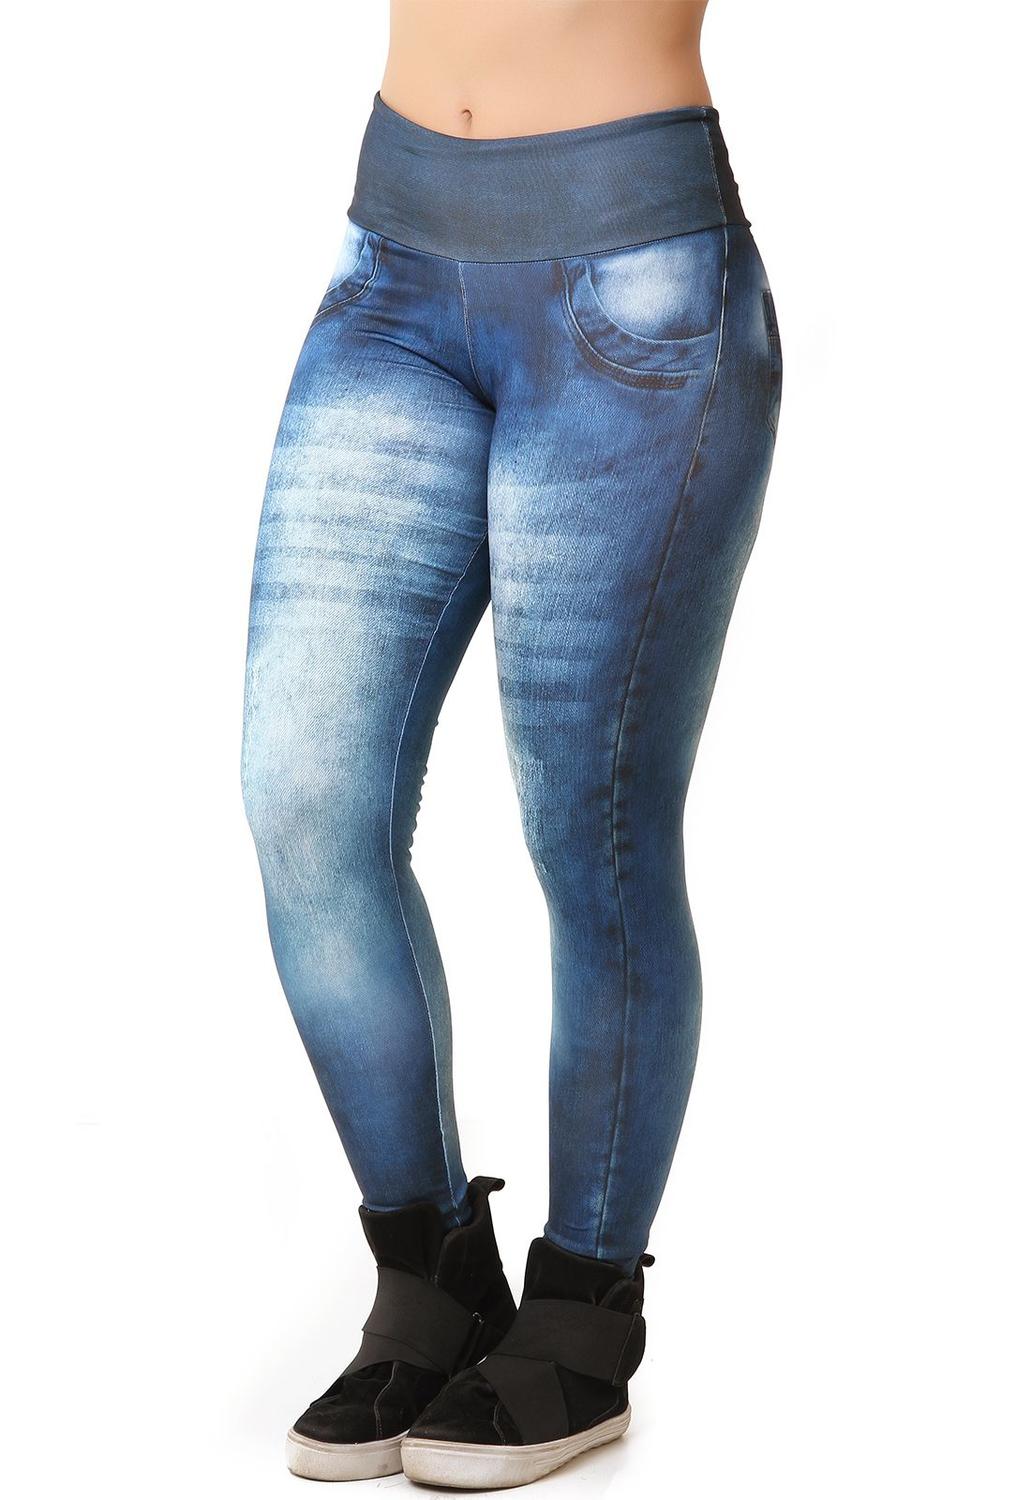 fitness jeans